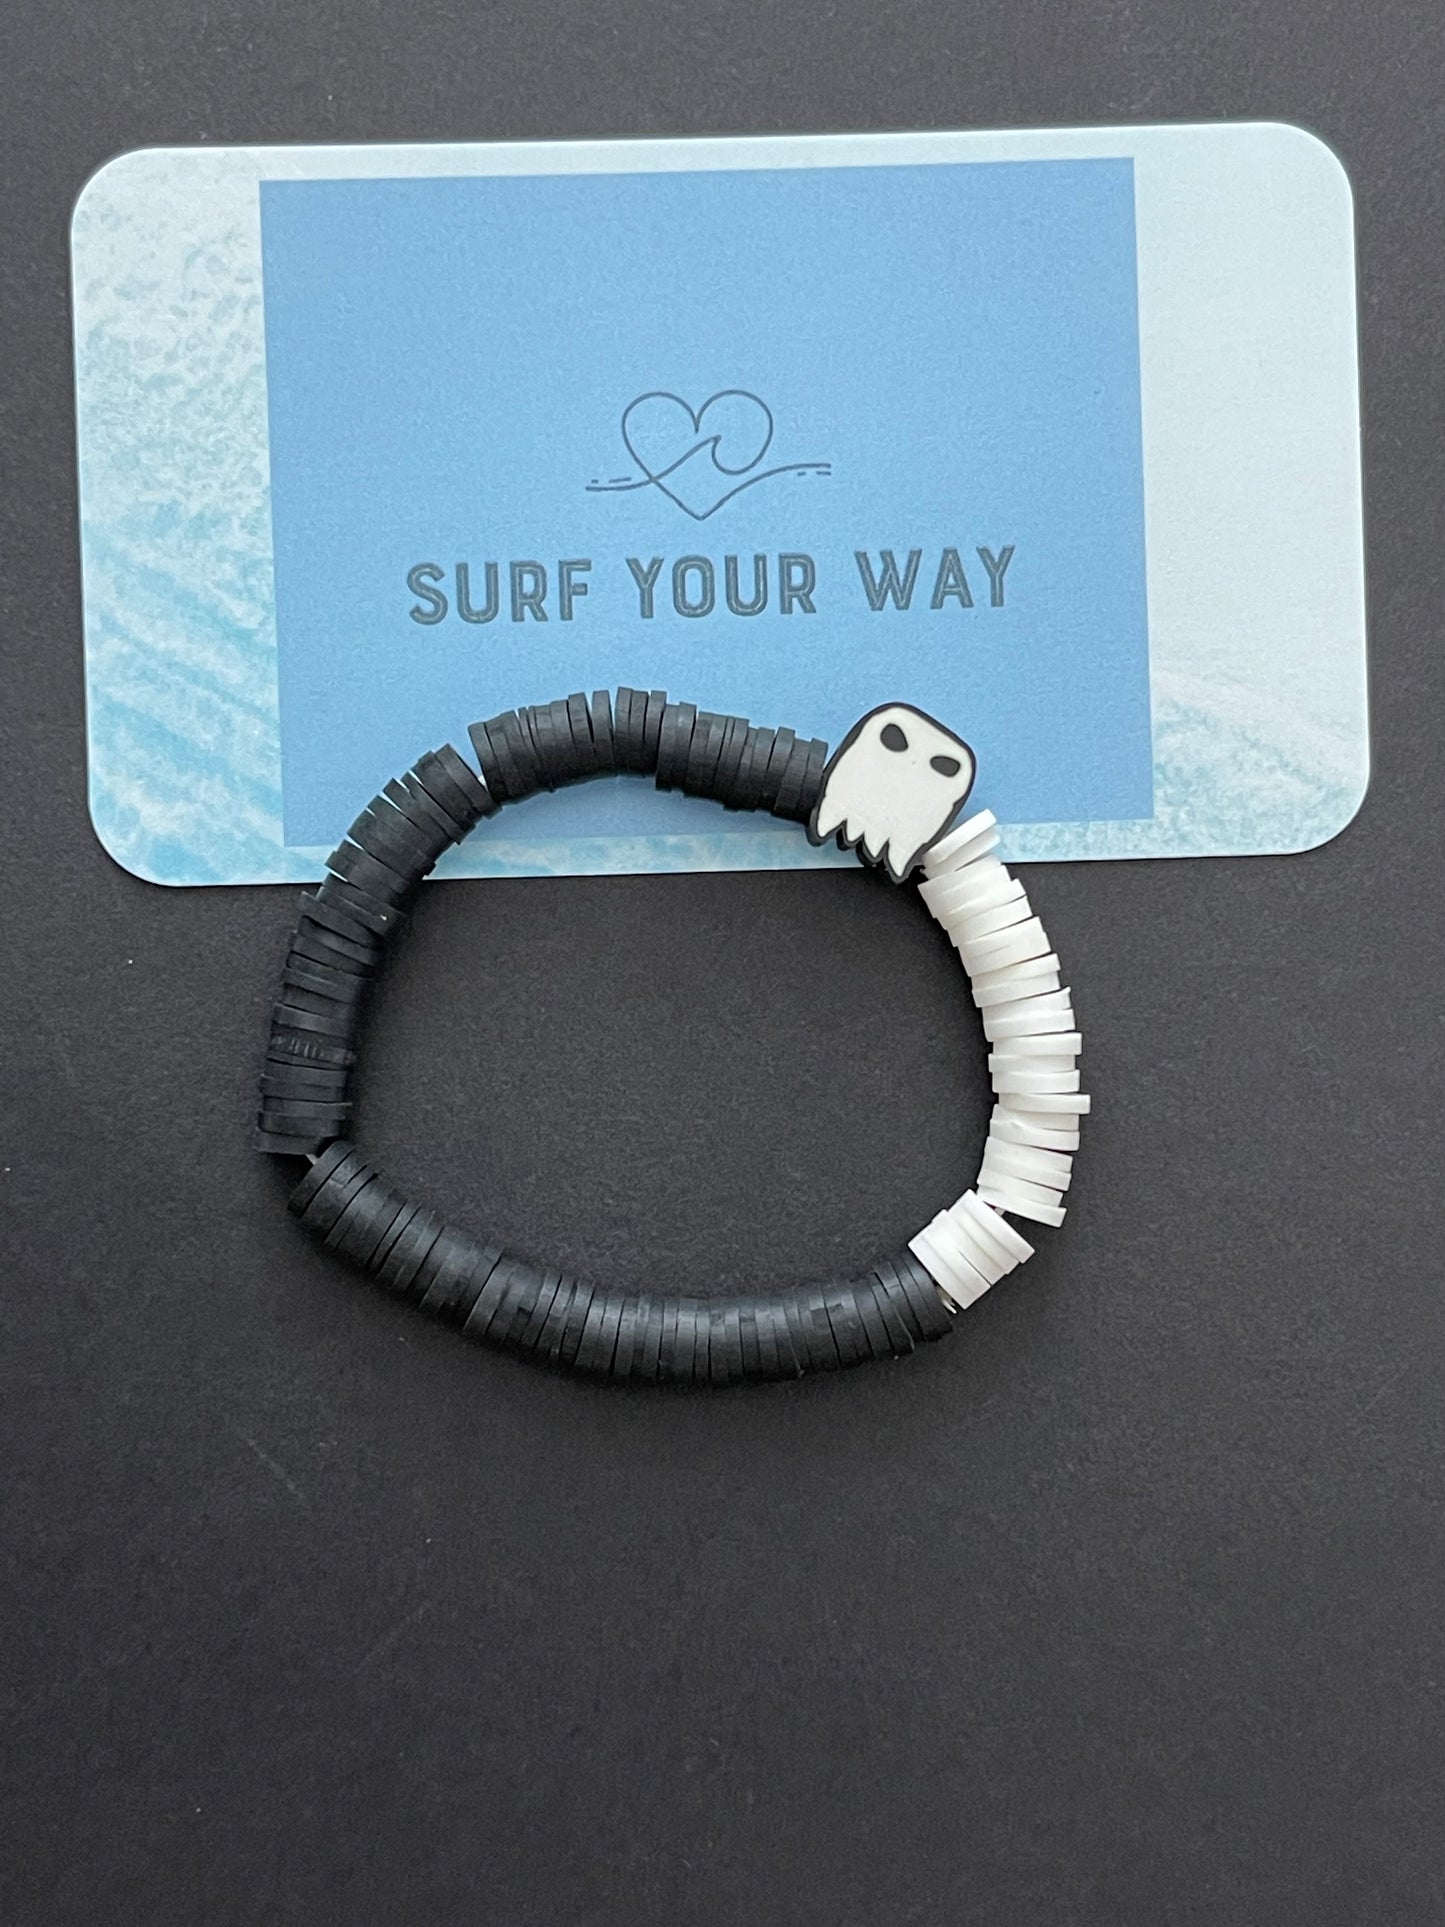 The “Bet This Scared You” Bracelet